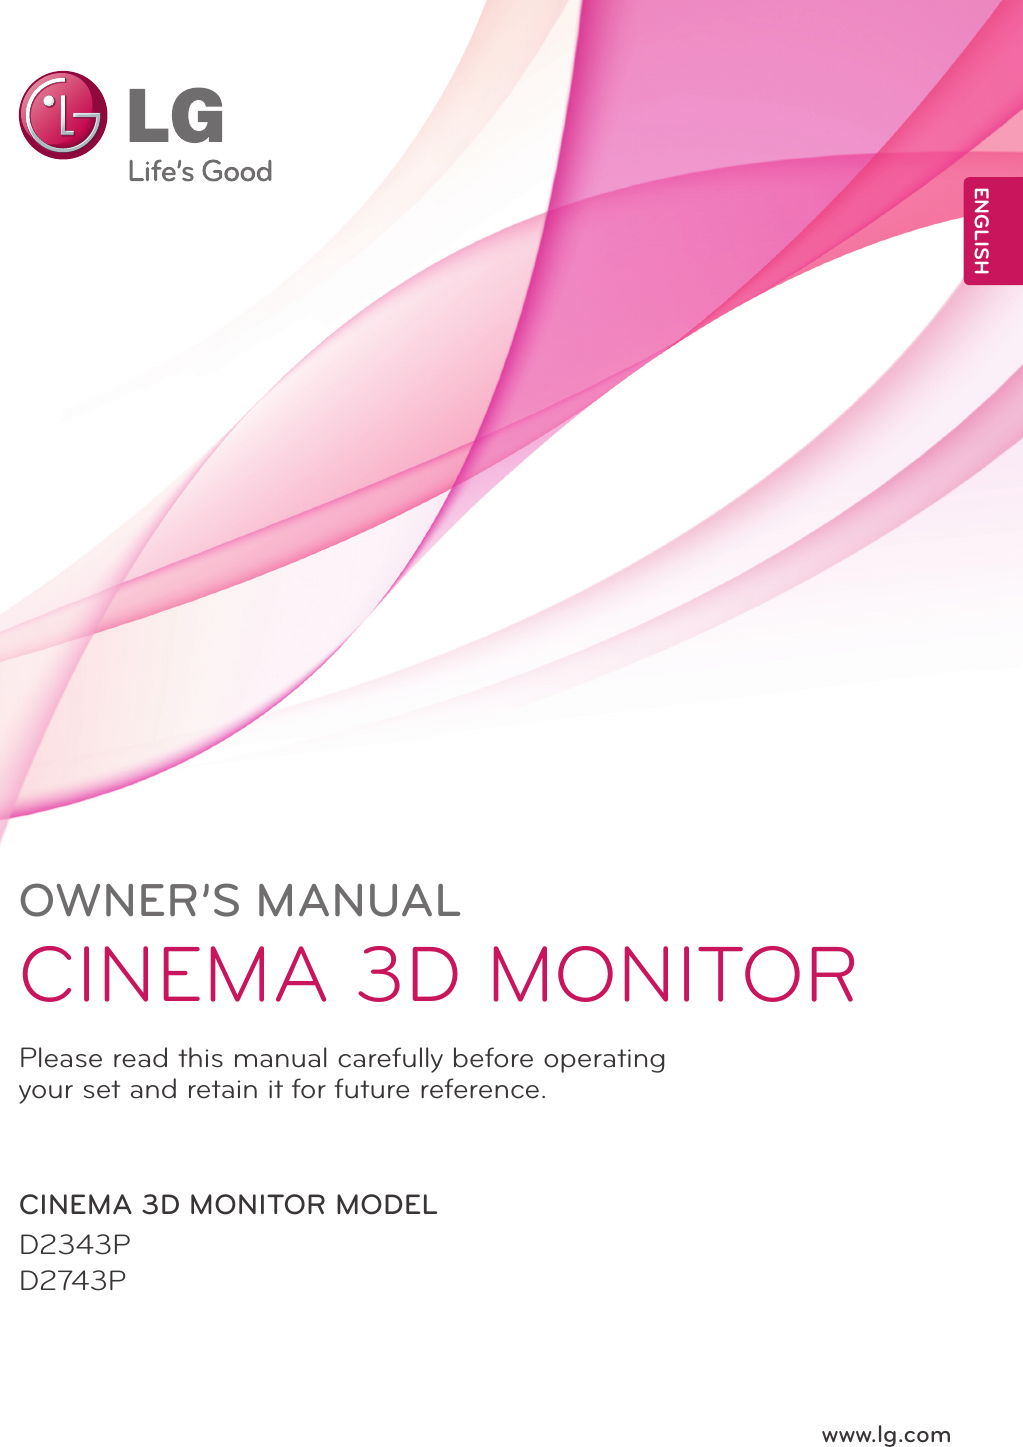 www.lg.comD2343PD2743PENGLISHOWNER’S MANUALCINEMA 3D MONITORPlease read this manual carefully before operating your set and retain it for future reference.CINEMA 3D MONITOR MODEL